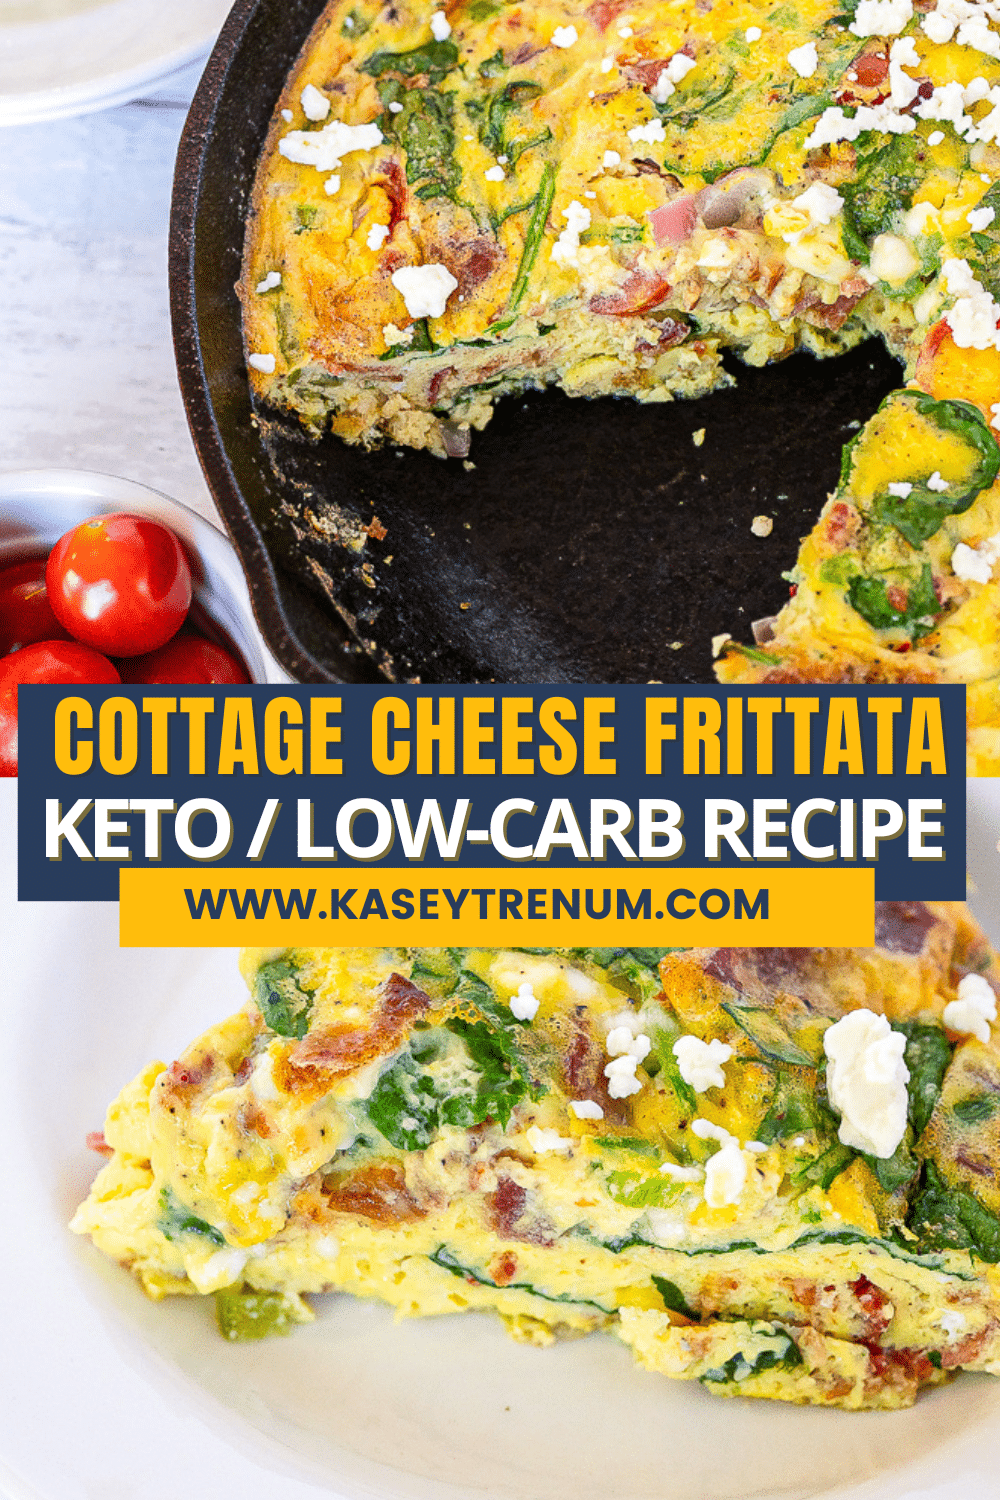 A collage image featuring a close-up of a keto bacon and vegetable frittata in a black skillet with a slice cut out, and a picture of the sliced frittata served on a white plate.